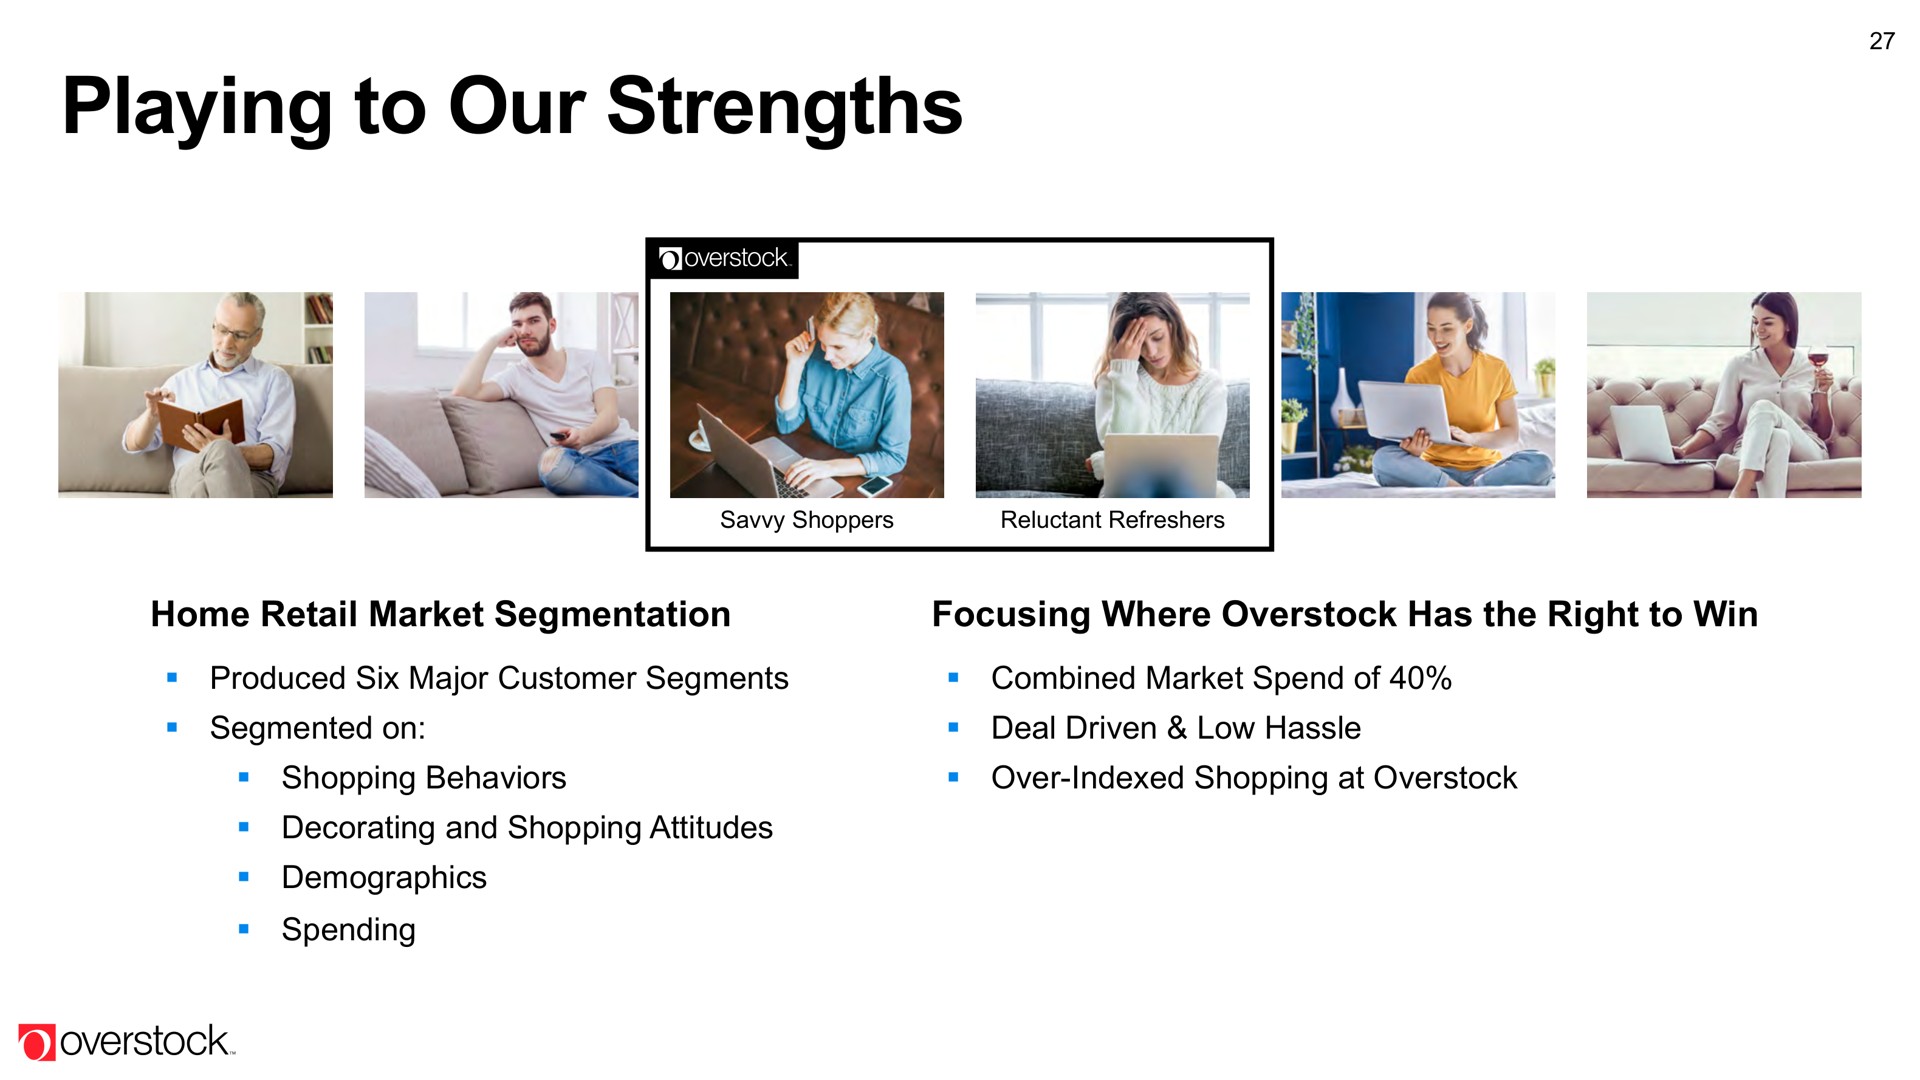 playing to our strengths | Overstock